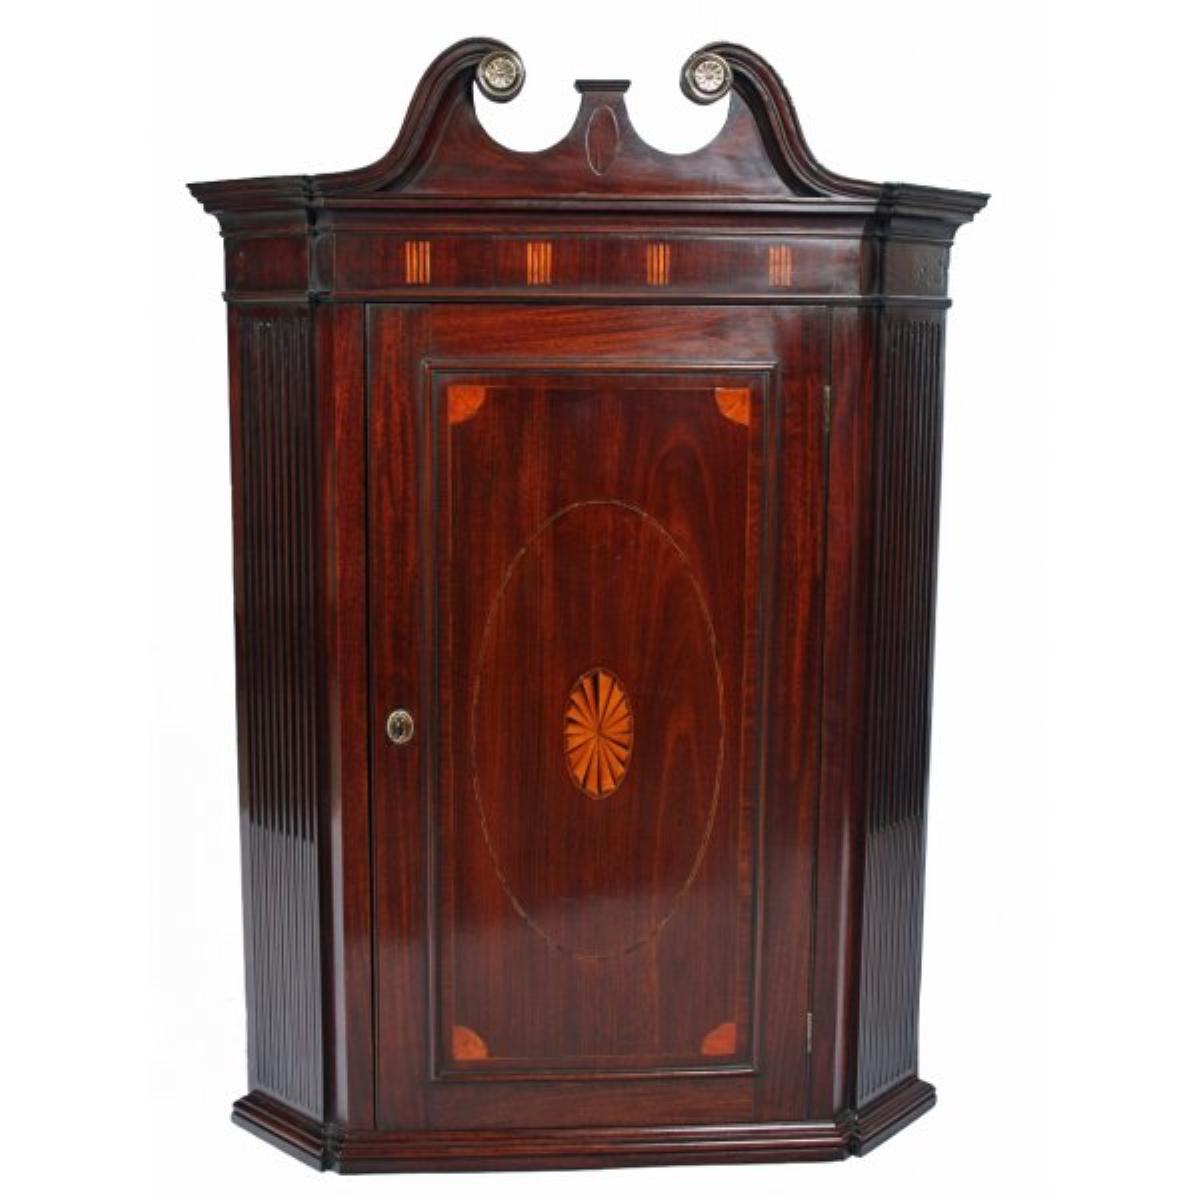 18th Century Mahogany corner cabinet

An exceptional example of an 18th century George III mahogany corner cupboard.

The cabinet has a single door with a framed panel incorporating central fan inlay and oval line inlay surrounds.

The